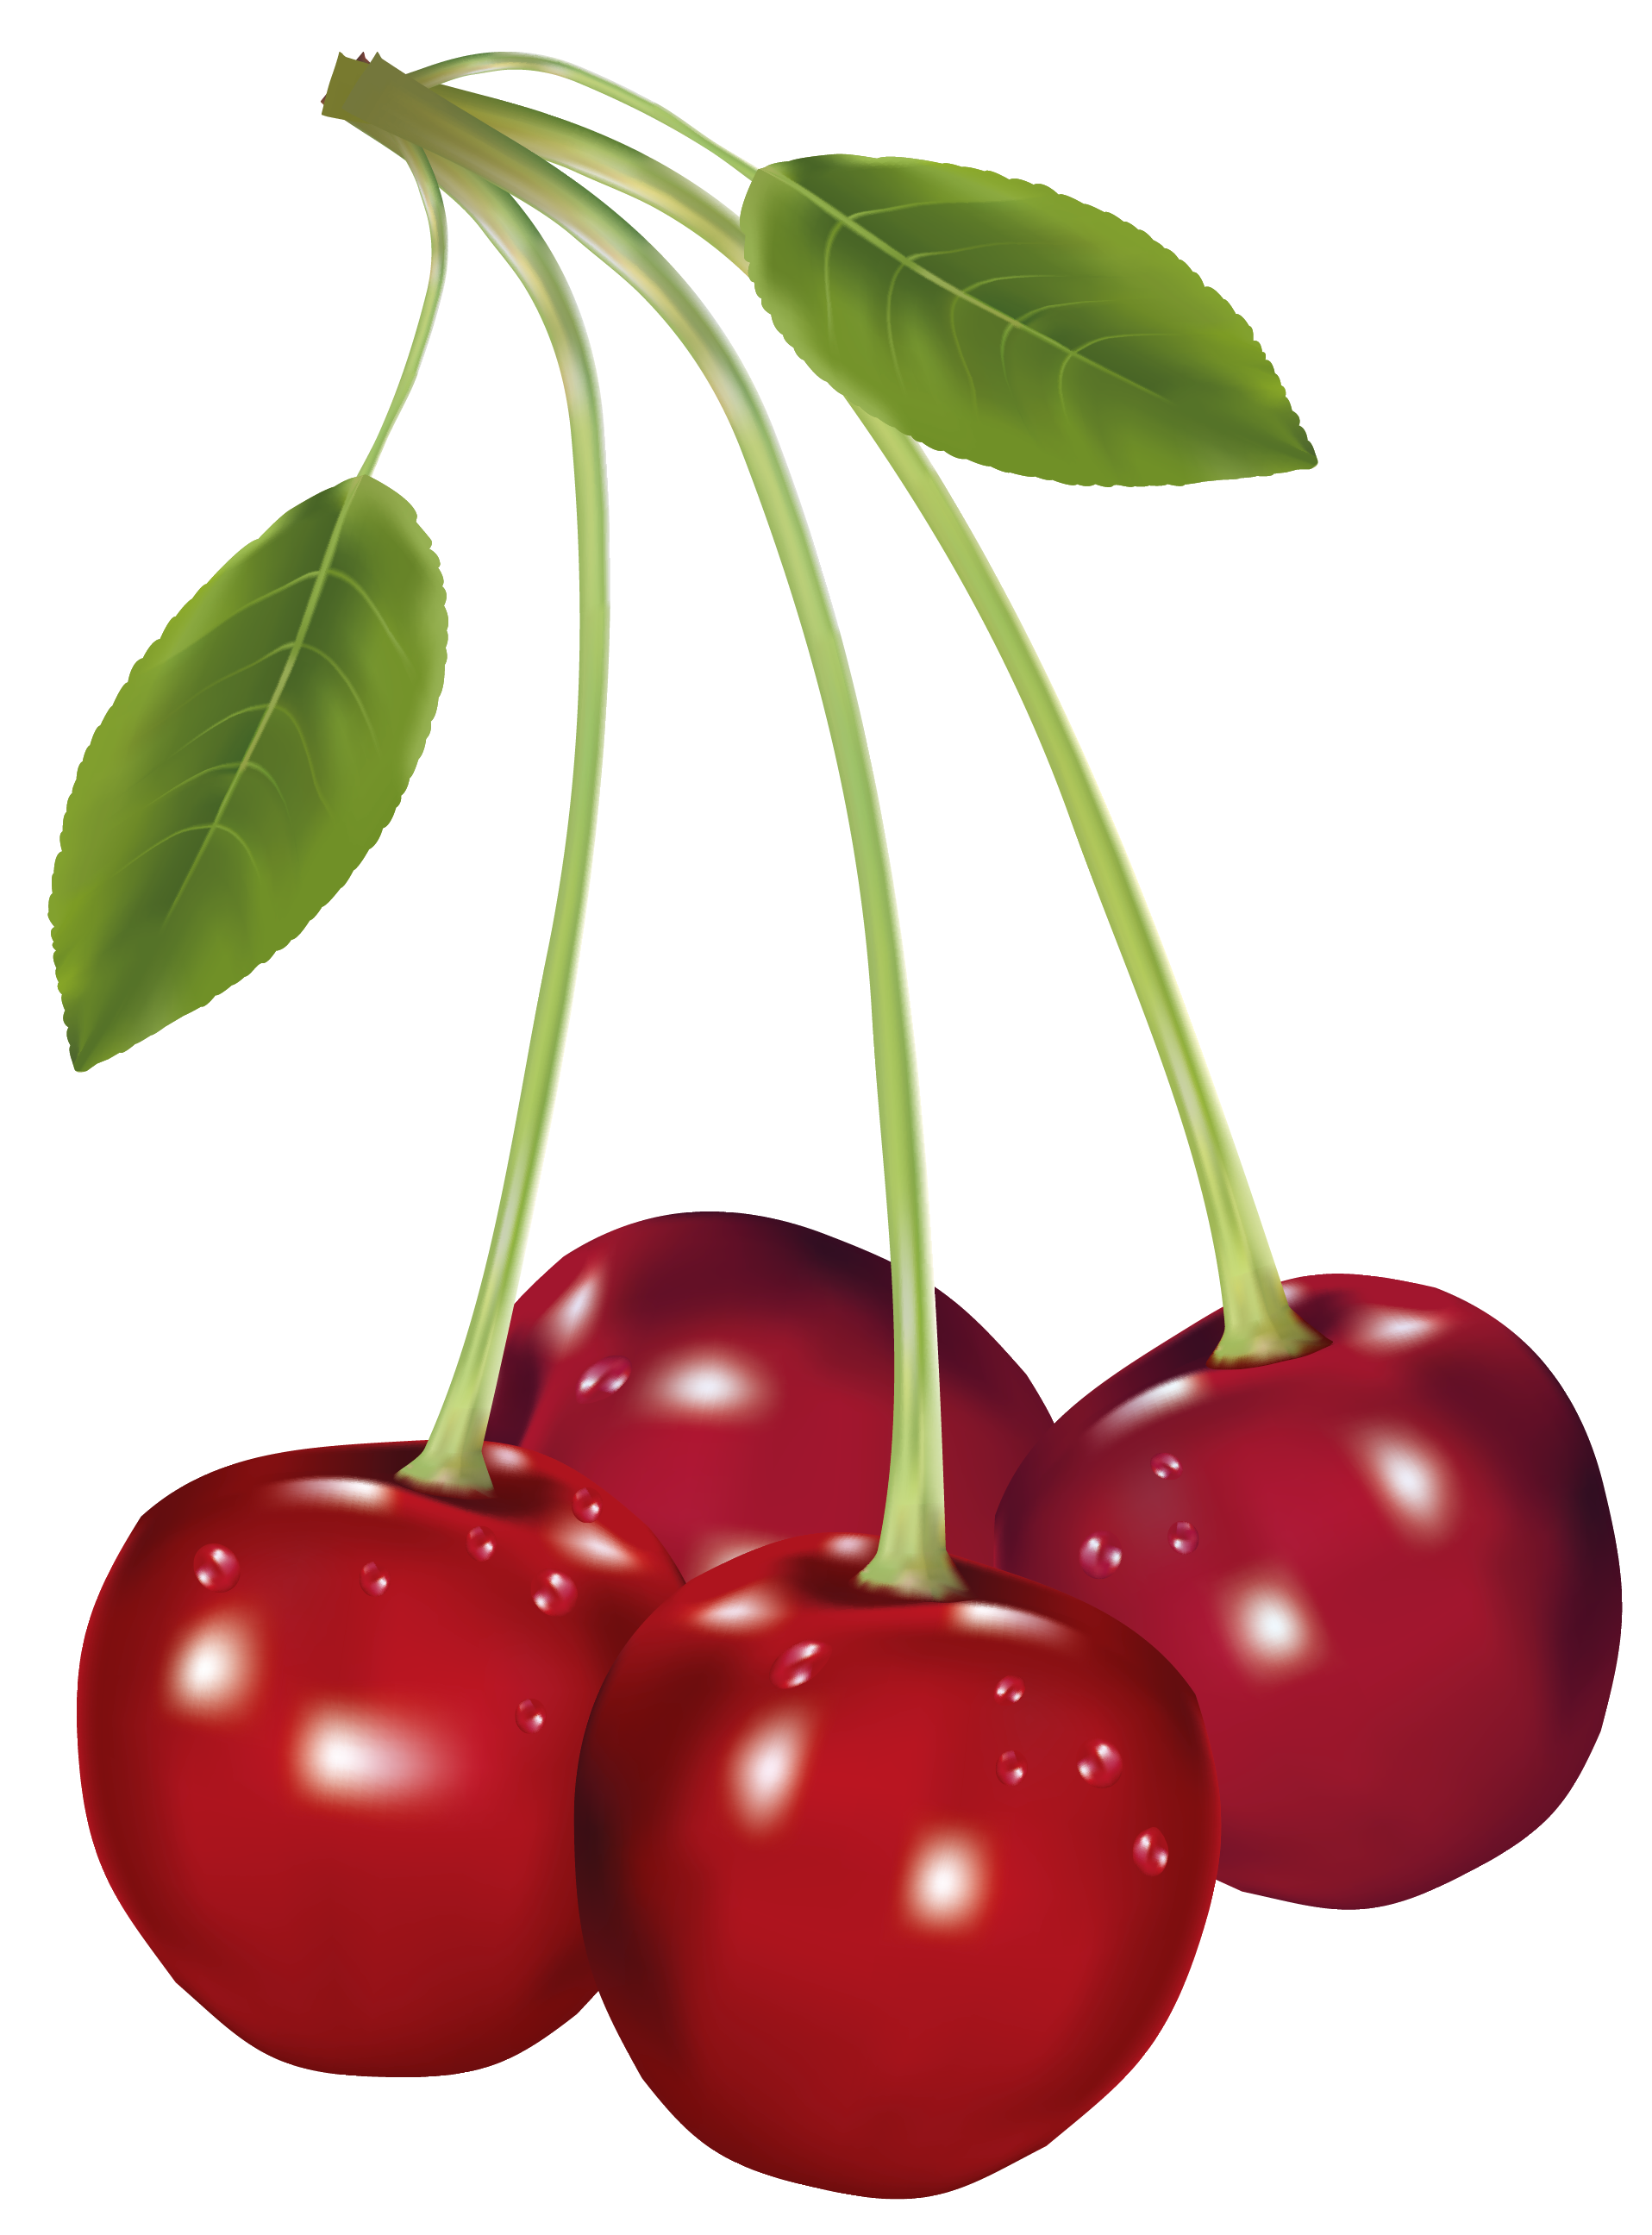 Cherries png picture gallery. Winter clipart vegetable